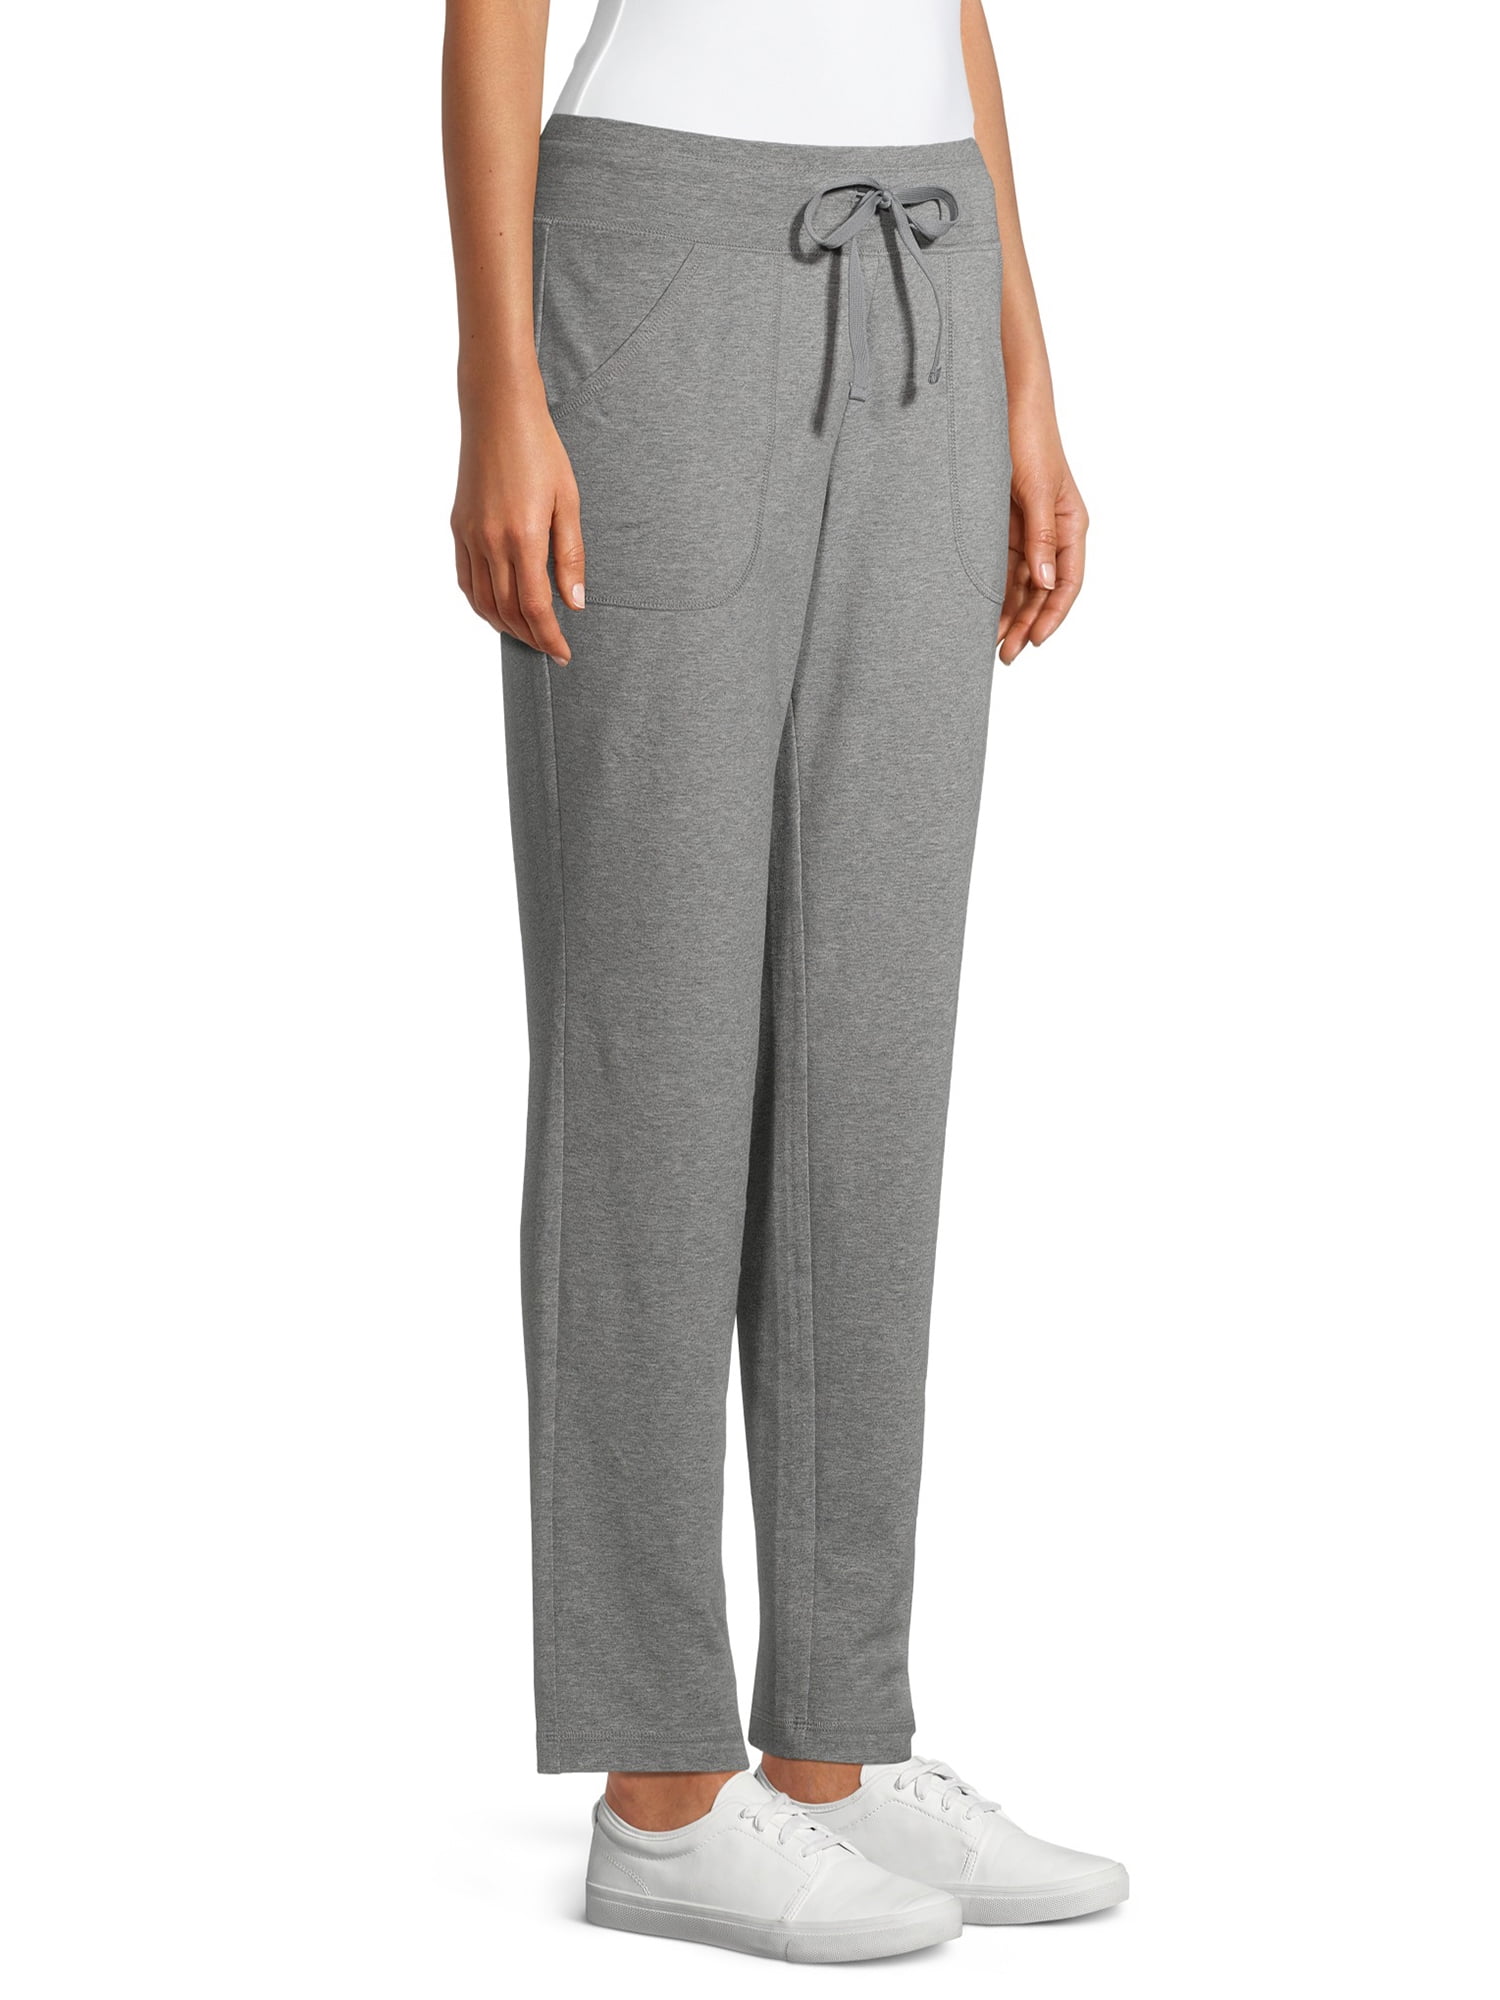 Buy Athletic Works Women's Relaxed Fit Dri-More Core Cotton Blend Yoga Pants,  Grey, S Petite at